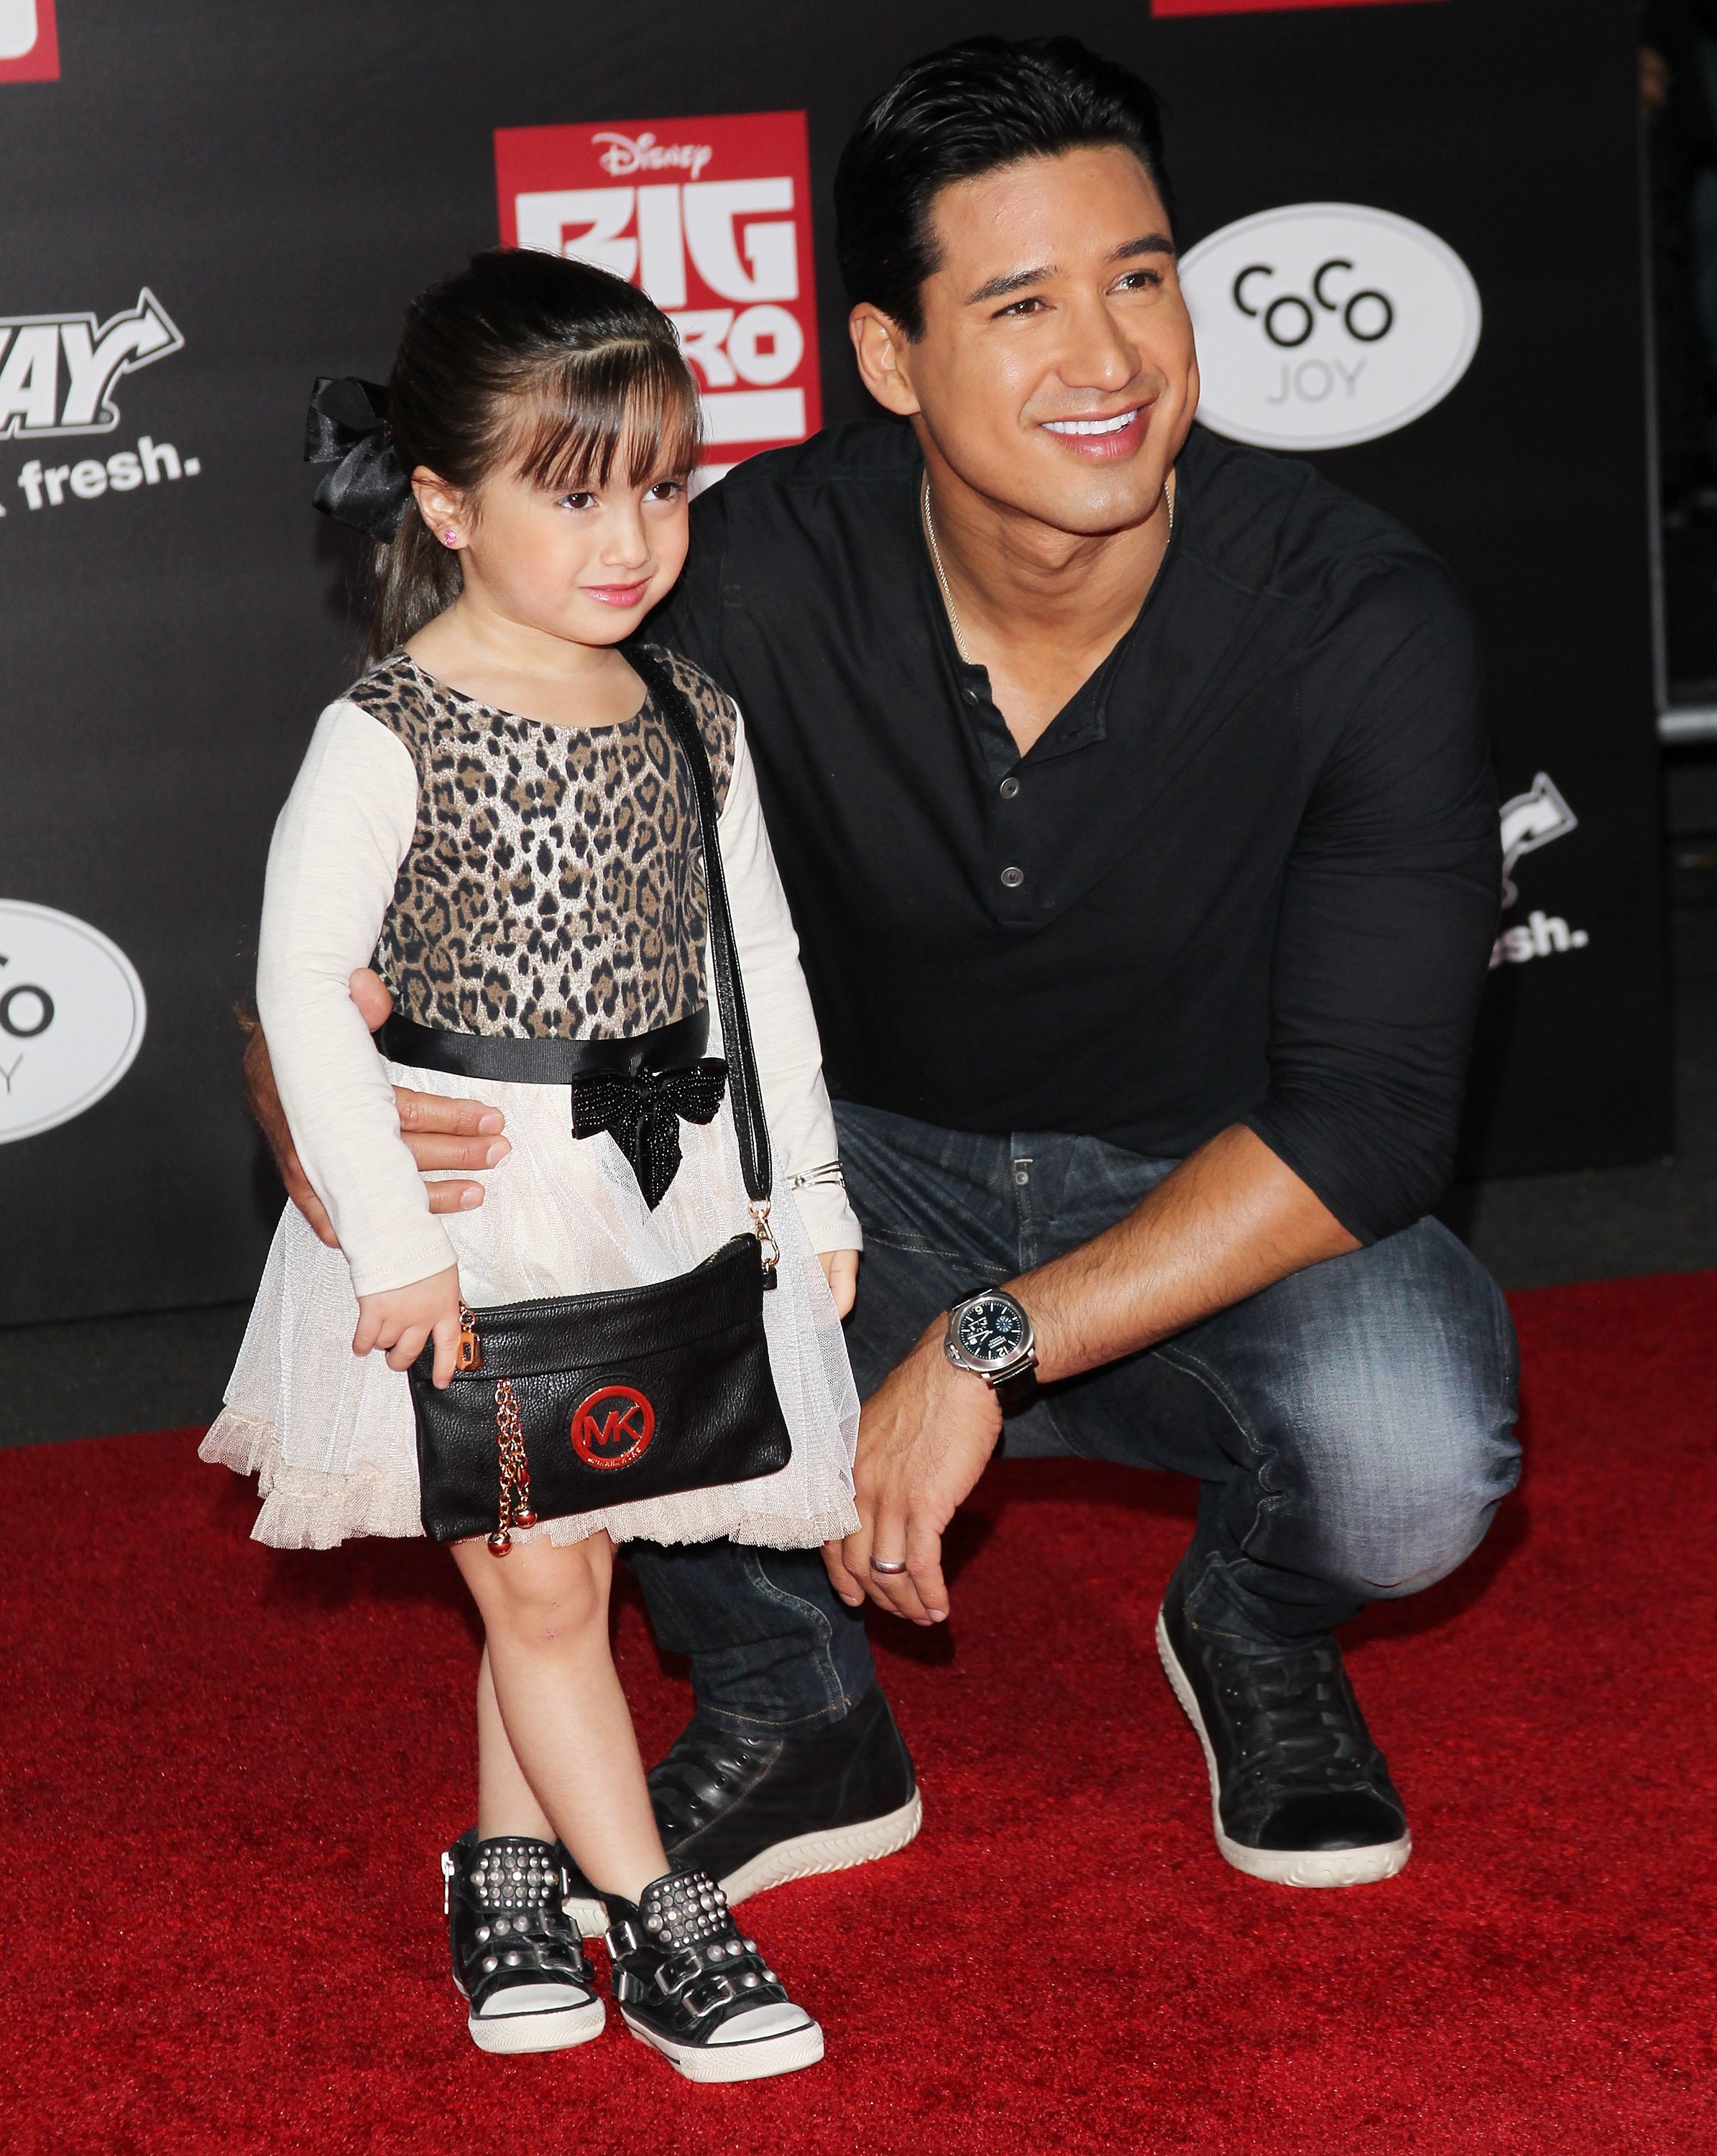 Mario Lopez and daughter Gia Francesca Lopez attend the Los Angeles premiere of "Big Hero 6" on November 4, 2014, in Hollywood, California. | Source: Getty Images